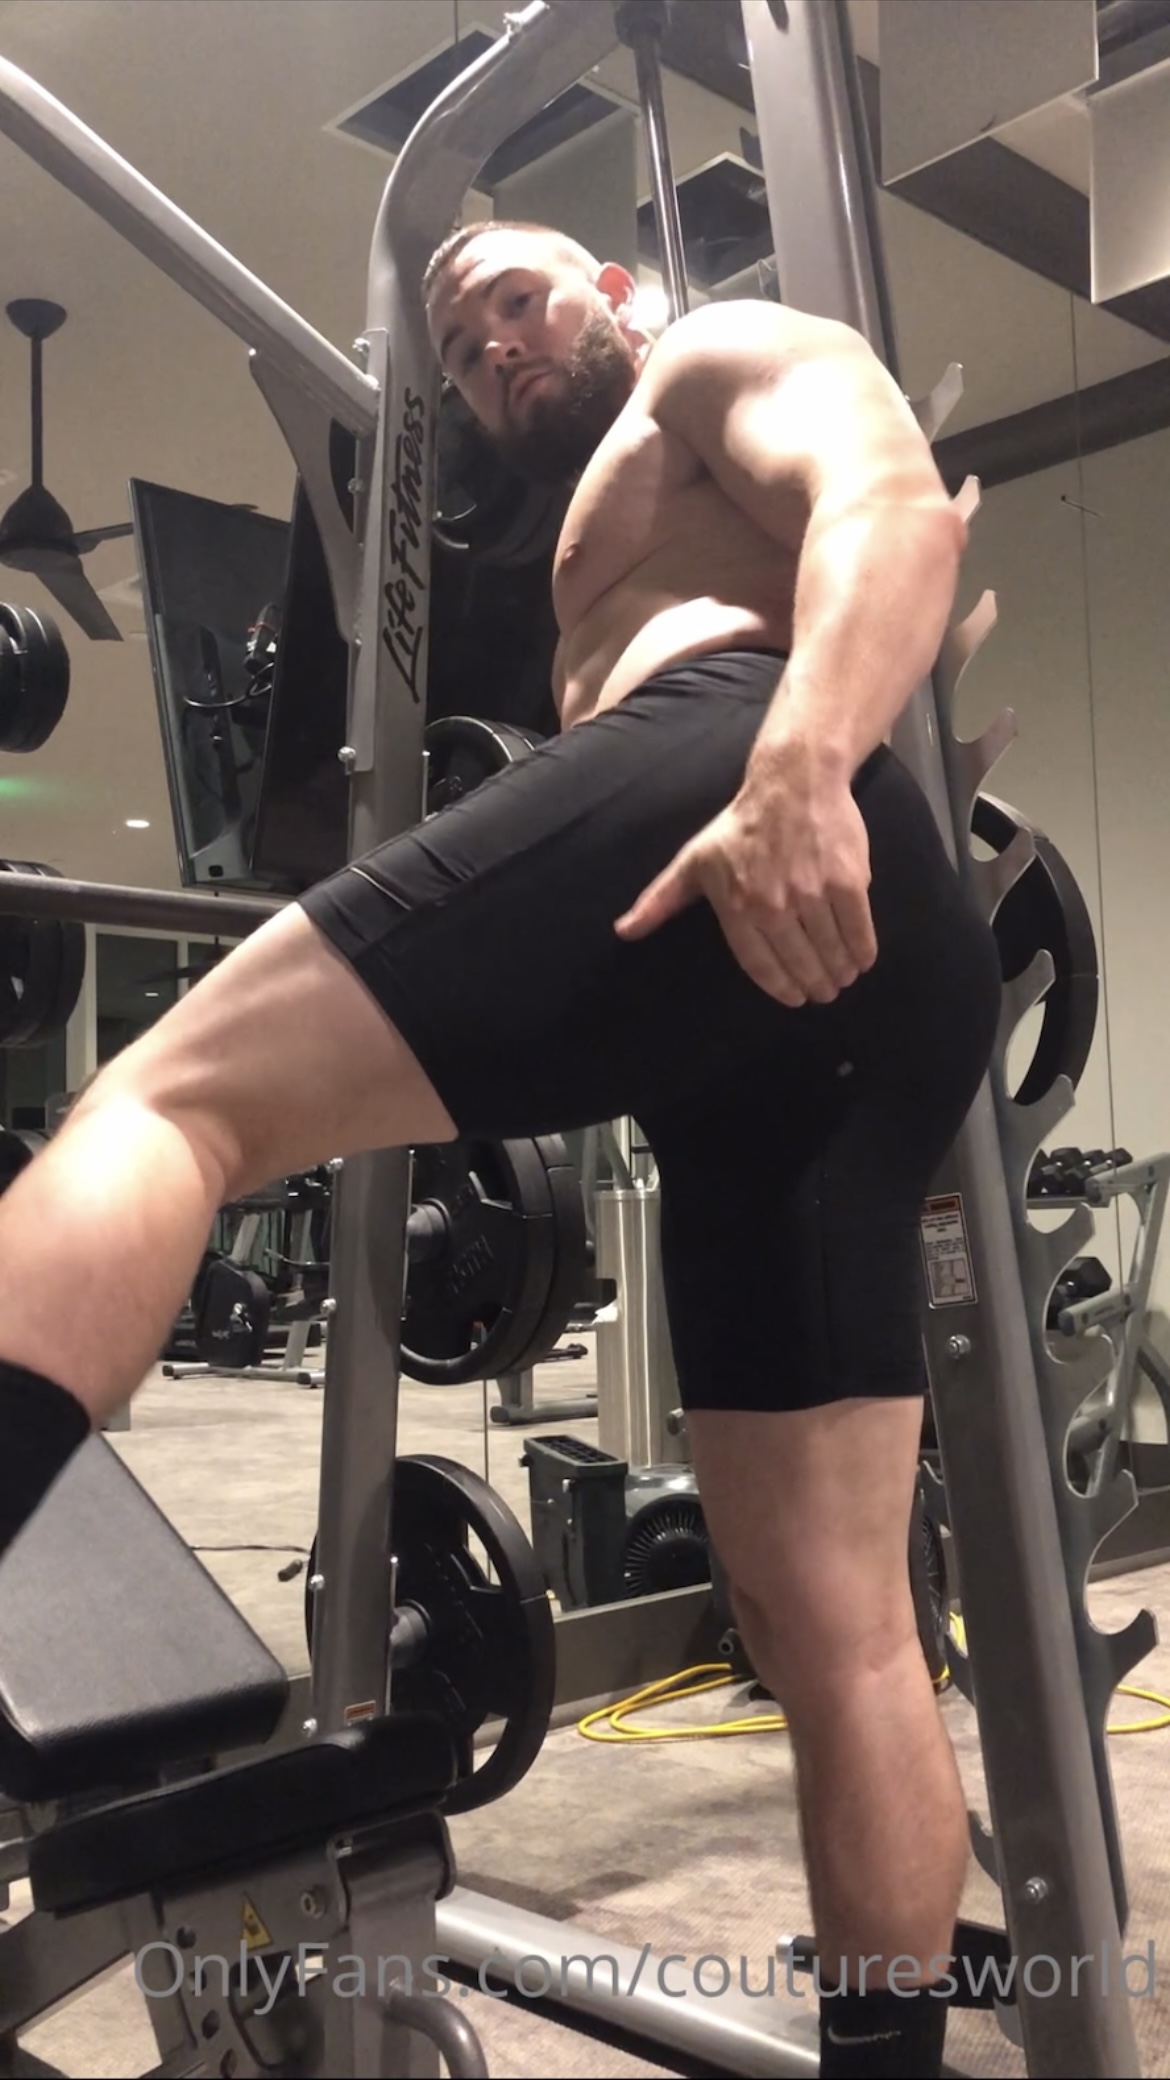 Spandex Gym - Beefy PAWB hunk daddy wears ripped lycra during workout - ThisVid.com